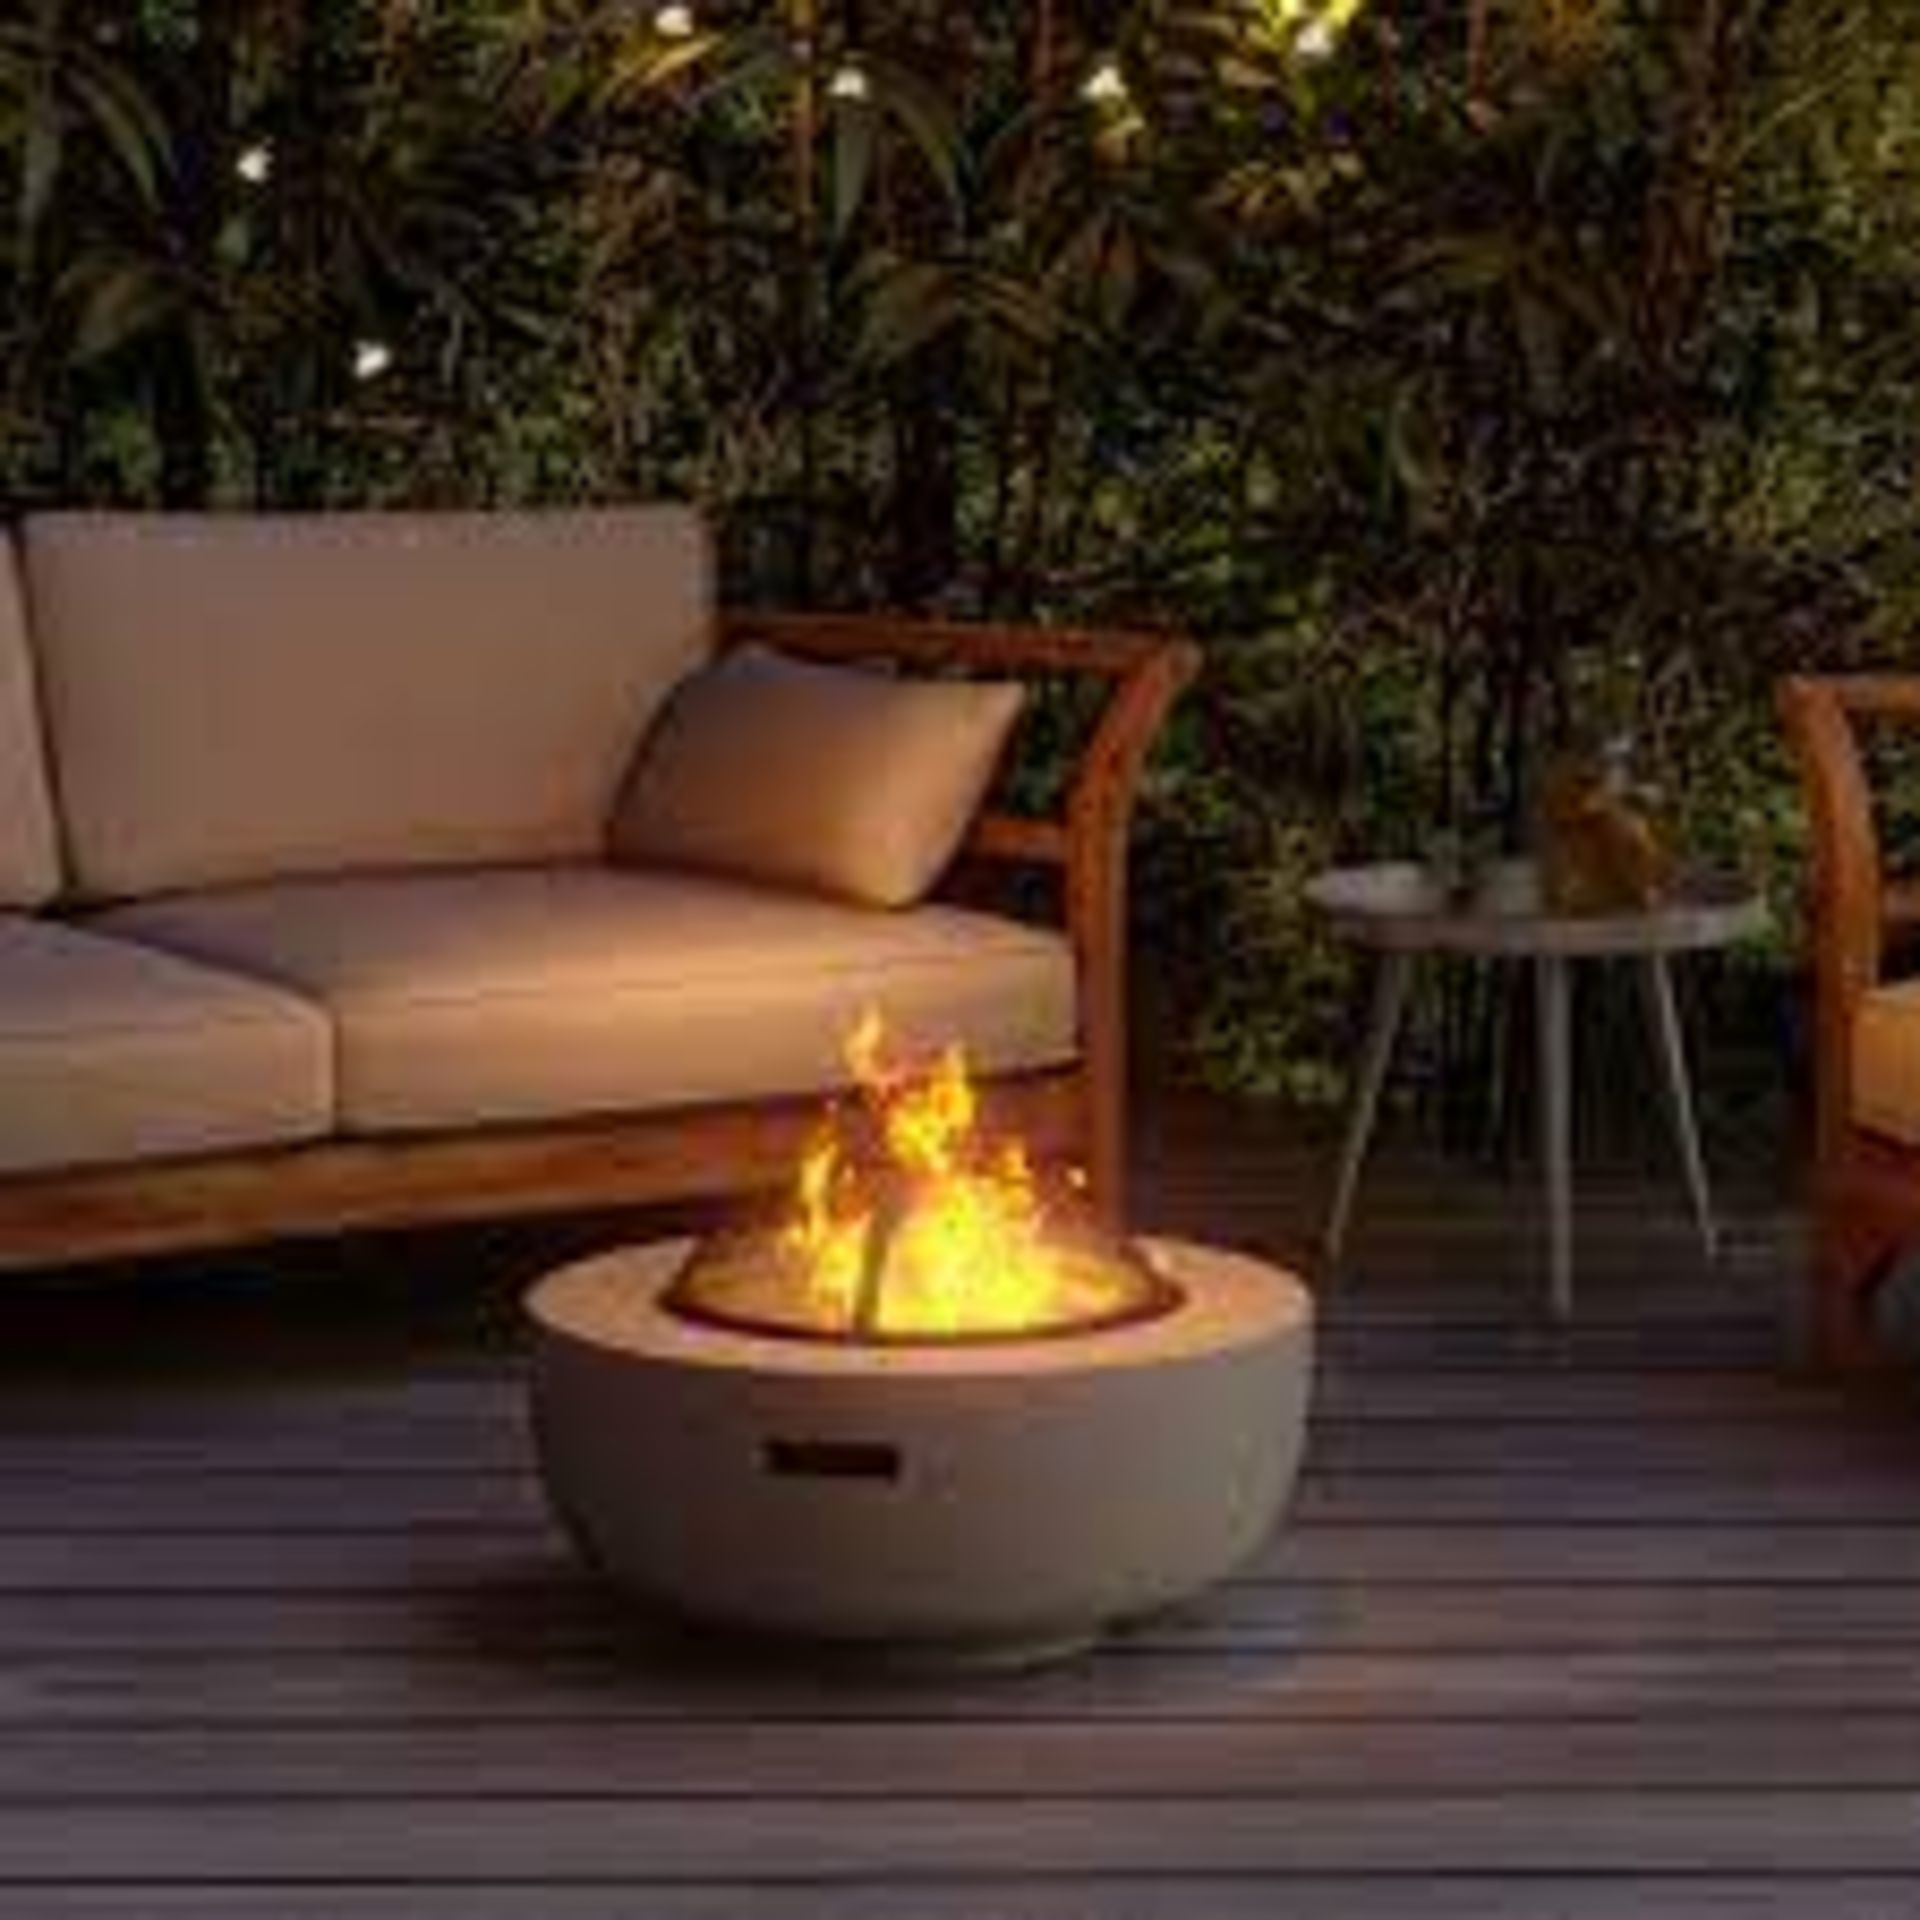 New Boxed Luxe Round MgO Fire Pit. (B/W) REF702. Don’t let the onset of evening curtail your day